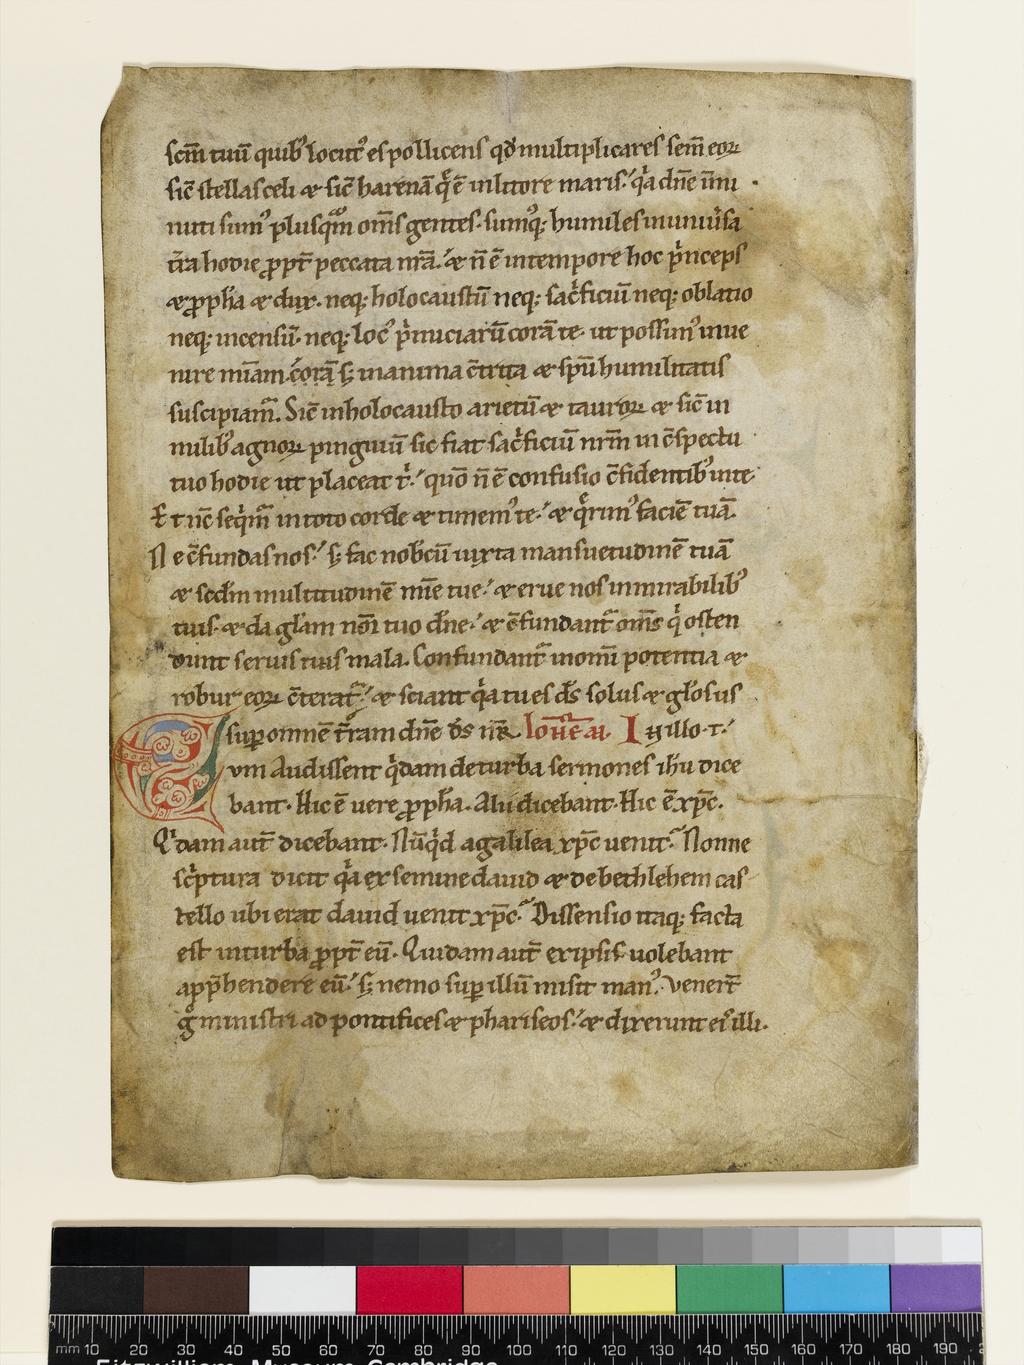 An image of Illuminated Manuscript. Leaf from a Lectionary. Excerpts from the Gospel of St John (7:40-53 and 11:47-49) and from Jeremiah 17:13-18. Gothic bookhand (textualis). Parchment, 237 x 173 (190 x 120) mm, 25 long lines, ruled in faint brown ink. Red arabesque initials [3 ll.] with floral or zoomorphic decoration on blue and green background; red penwork one-line initials. Parchment, gold, 1150-1200. Germany, Middle Rhine.